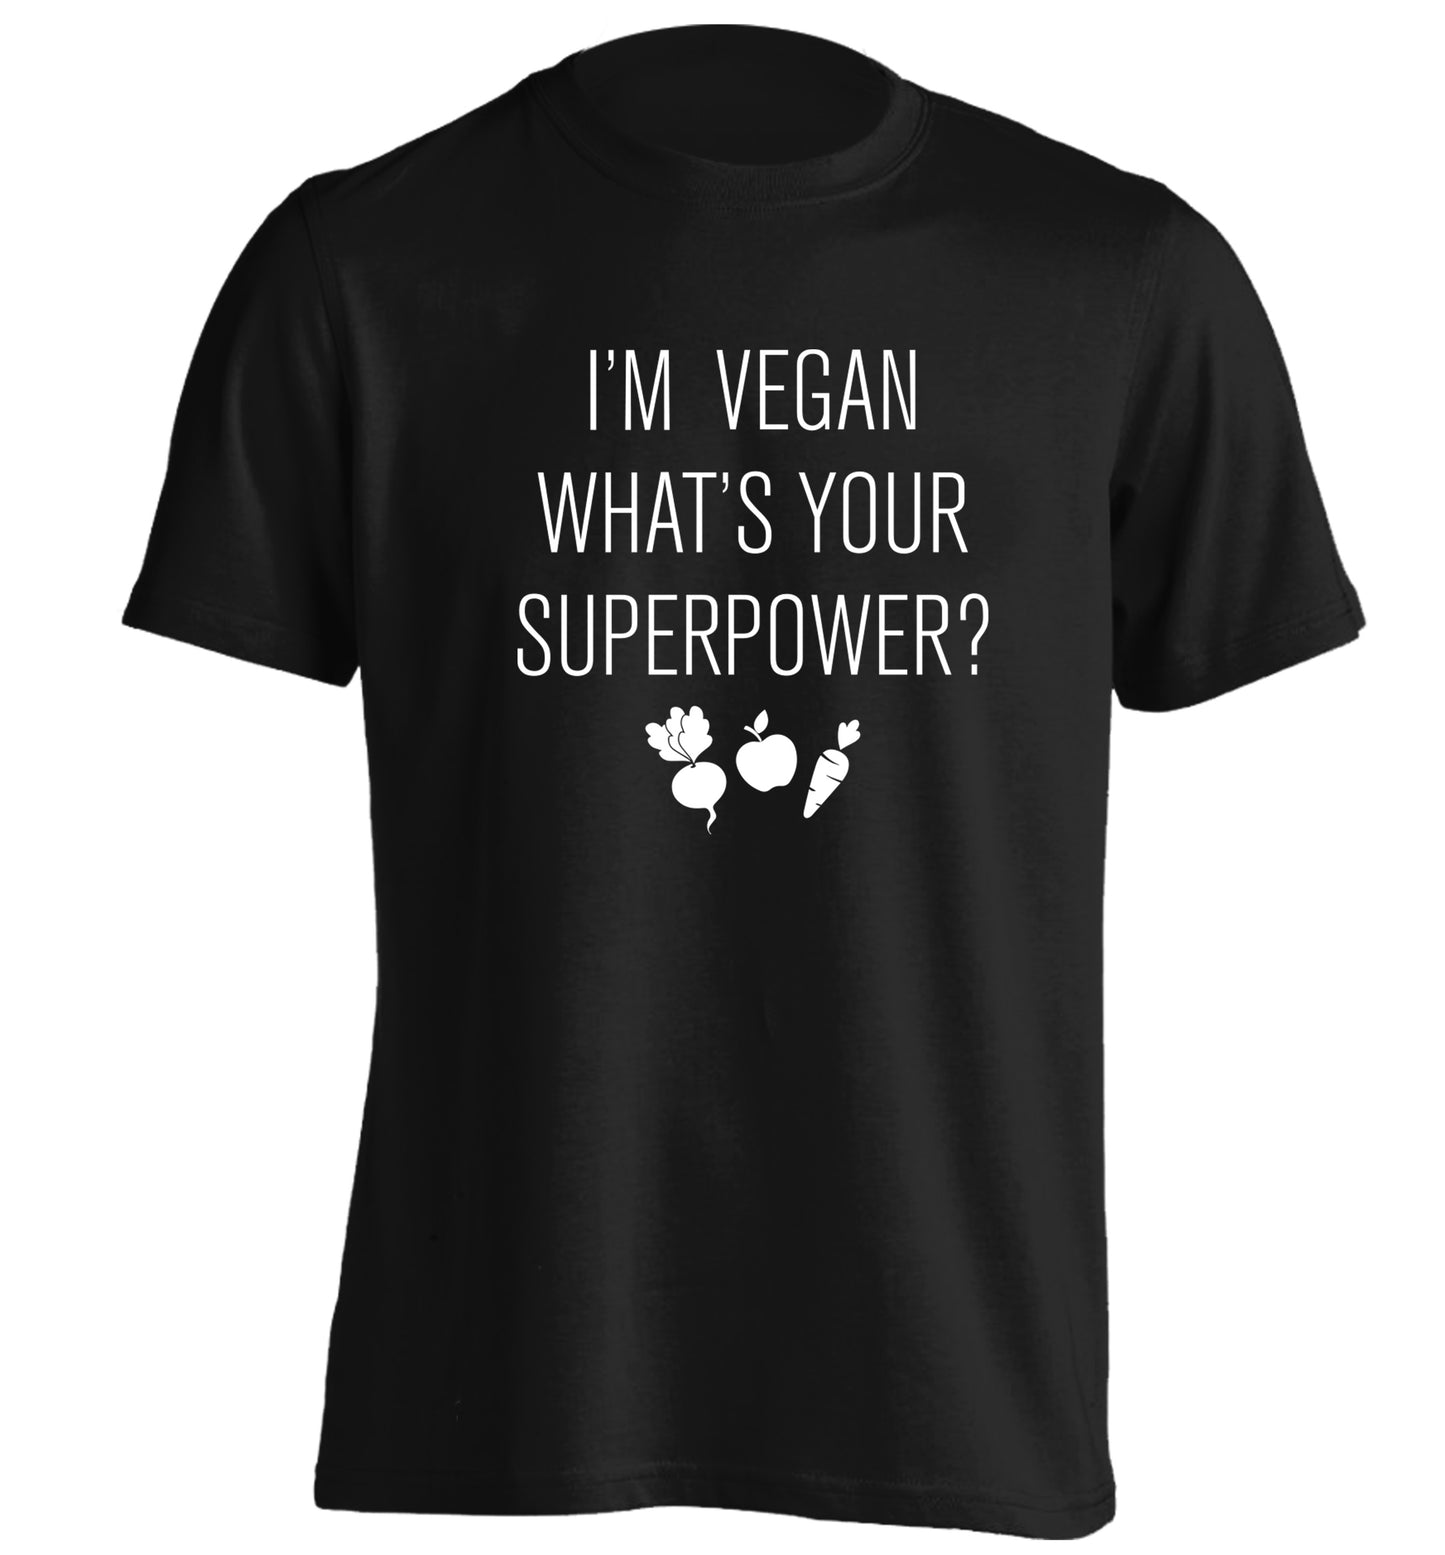 I'm Vegan What's Your Superpower? adults unisex black Tshirt 2XL